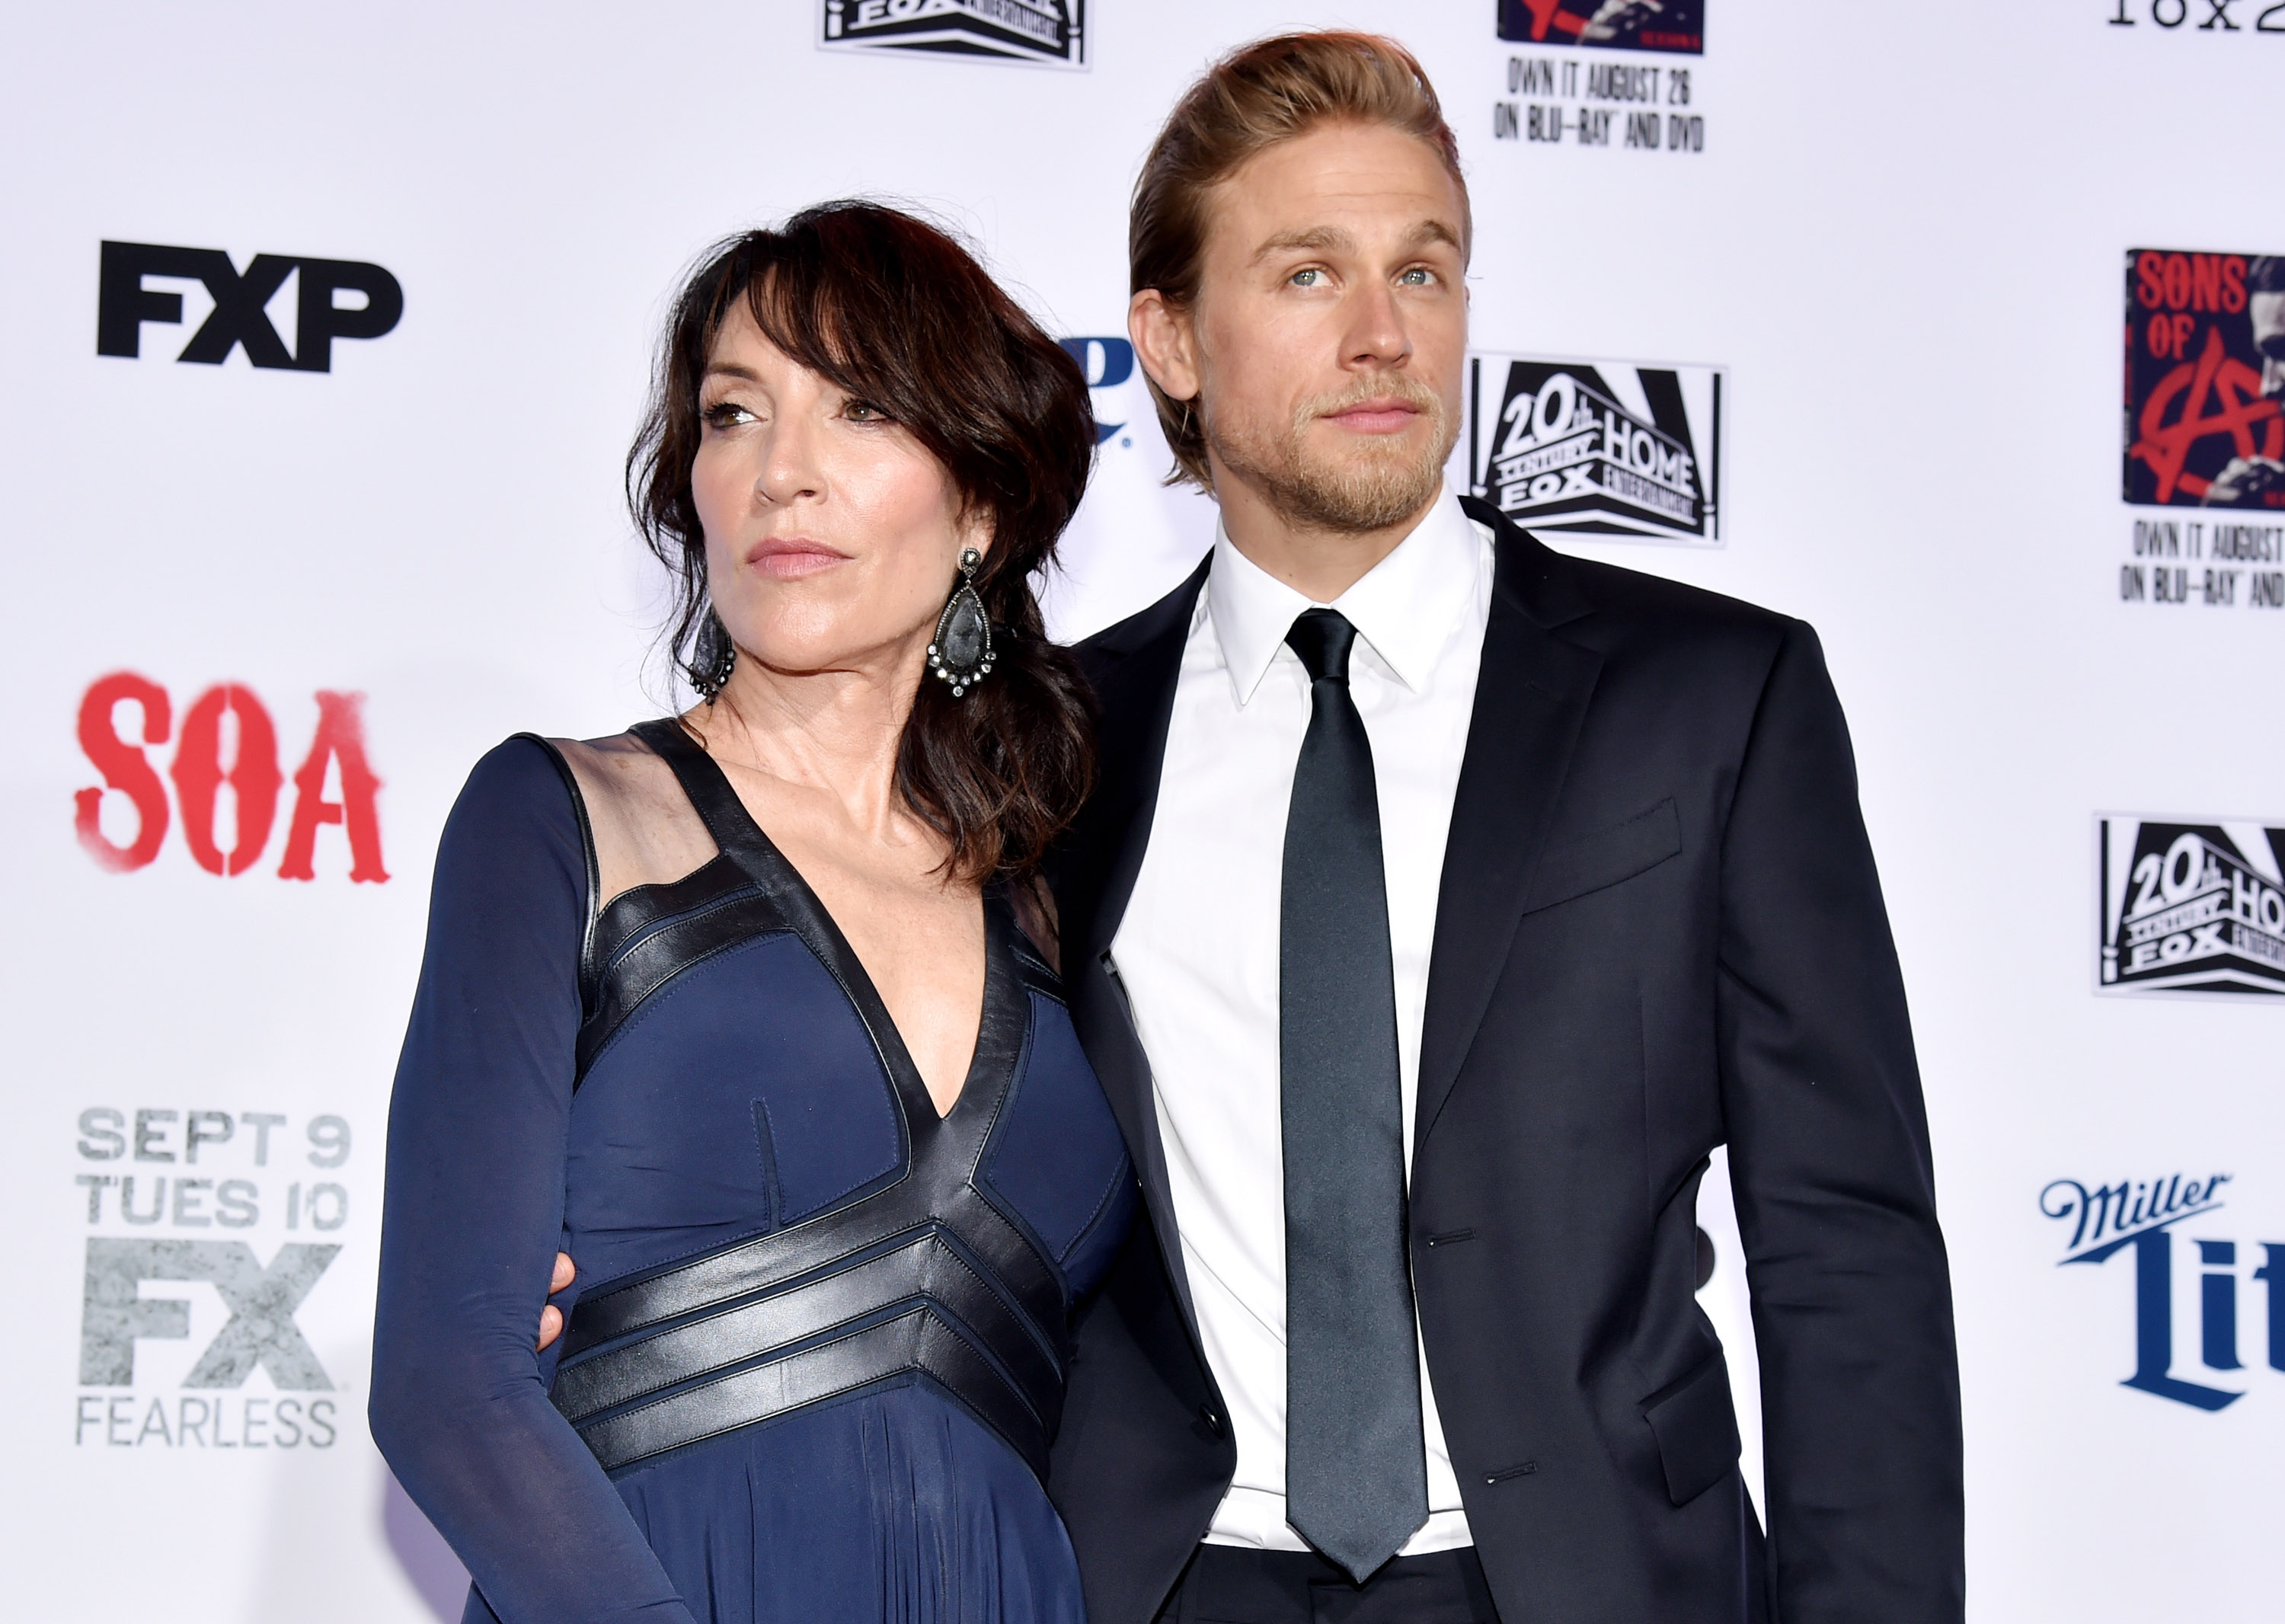 Sons of Anarchy stars Charlie Hunnam and Katey Sagal are honored in some Mayans MC easter eggs. The pair pose for a photo. 